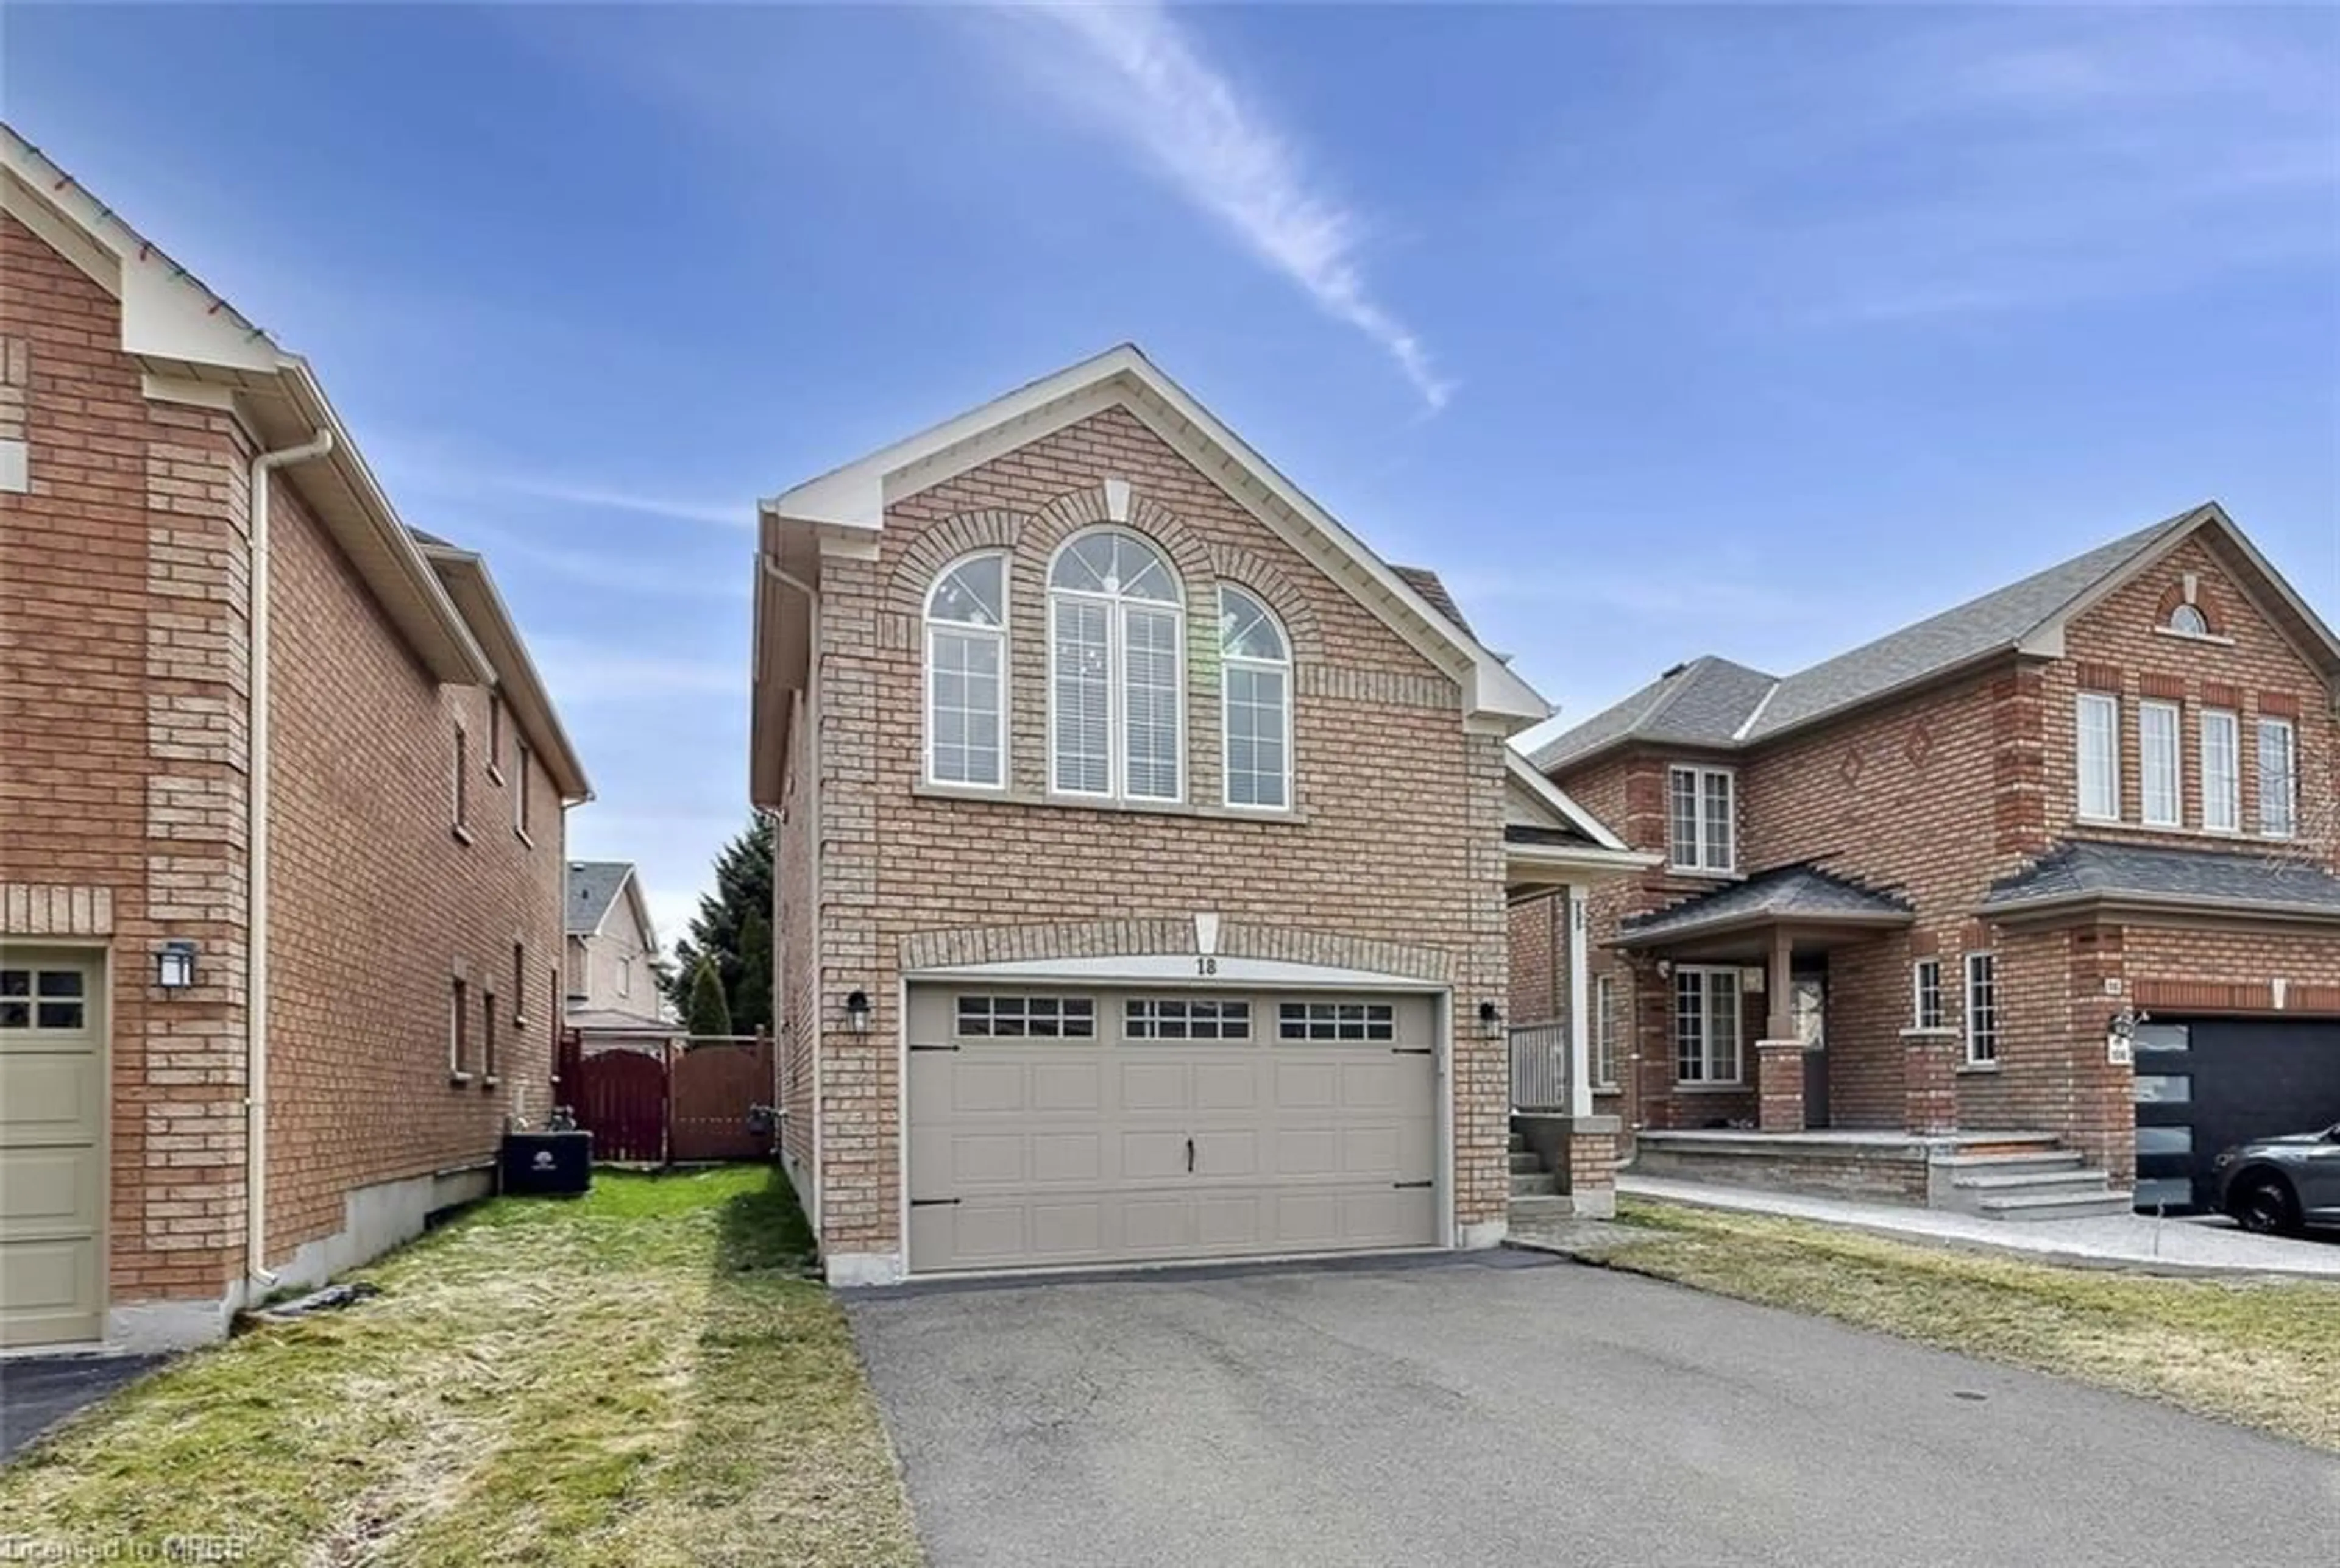 Home with brick exterior material for 18 Prince Cres, Brampton Ontario L7A 2C9